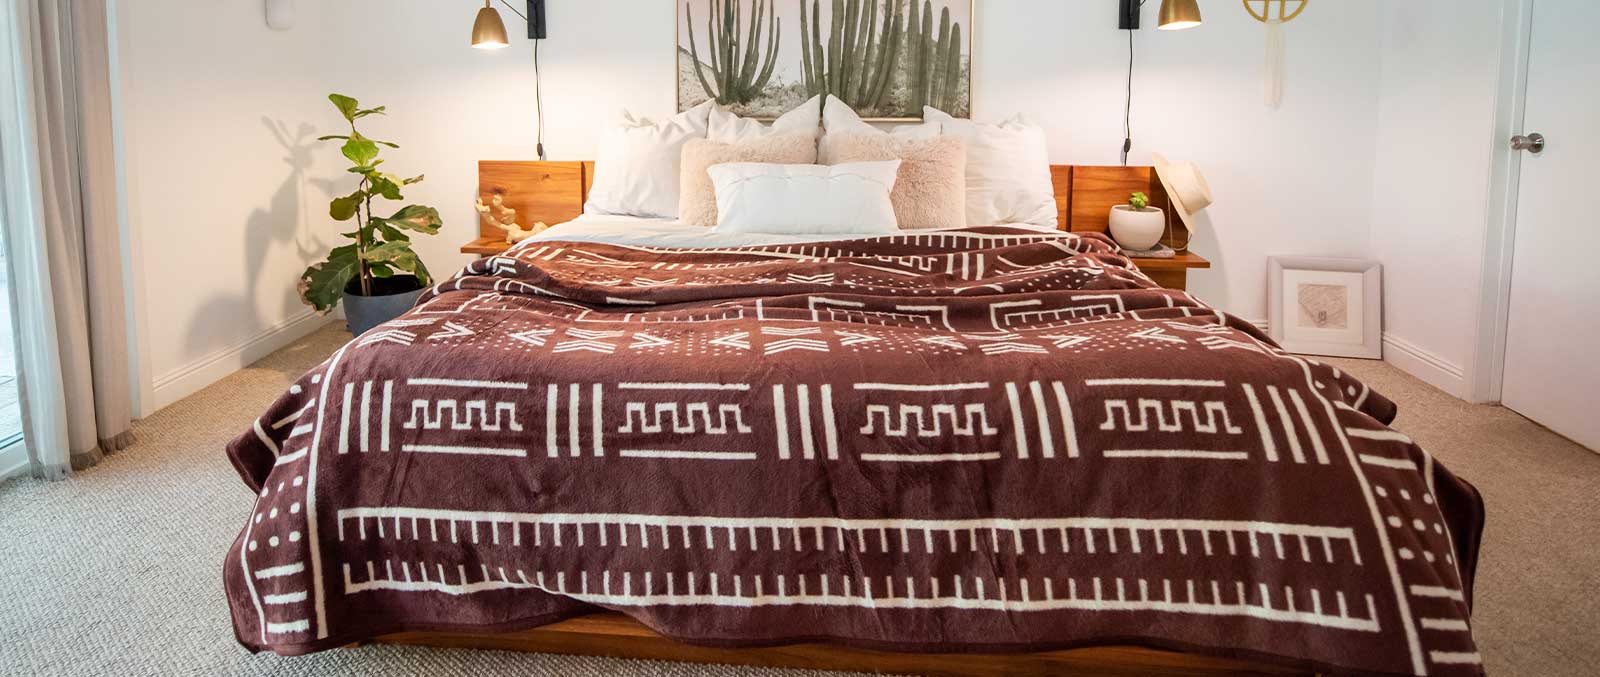 Thula Tula blanket spread on the bed